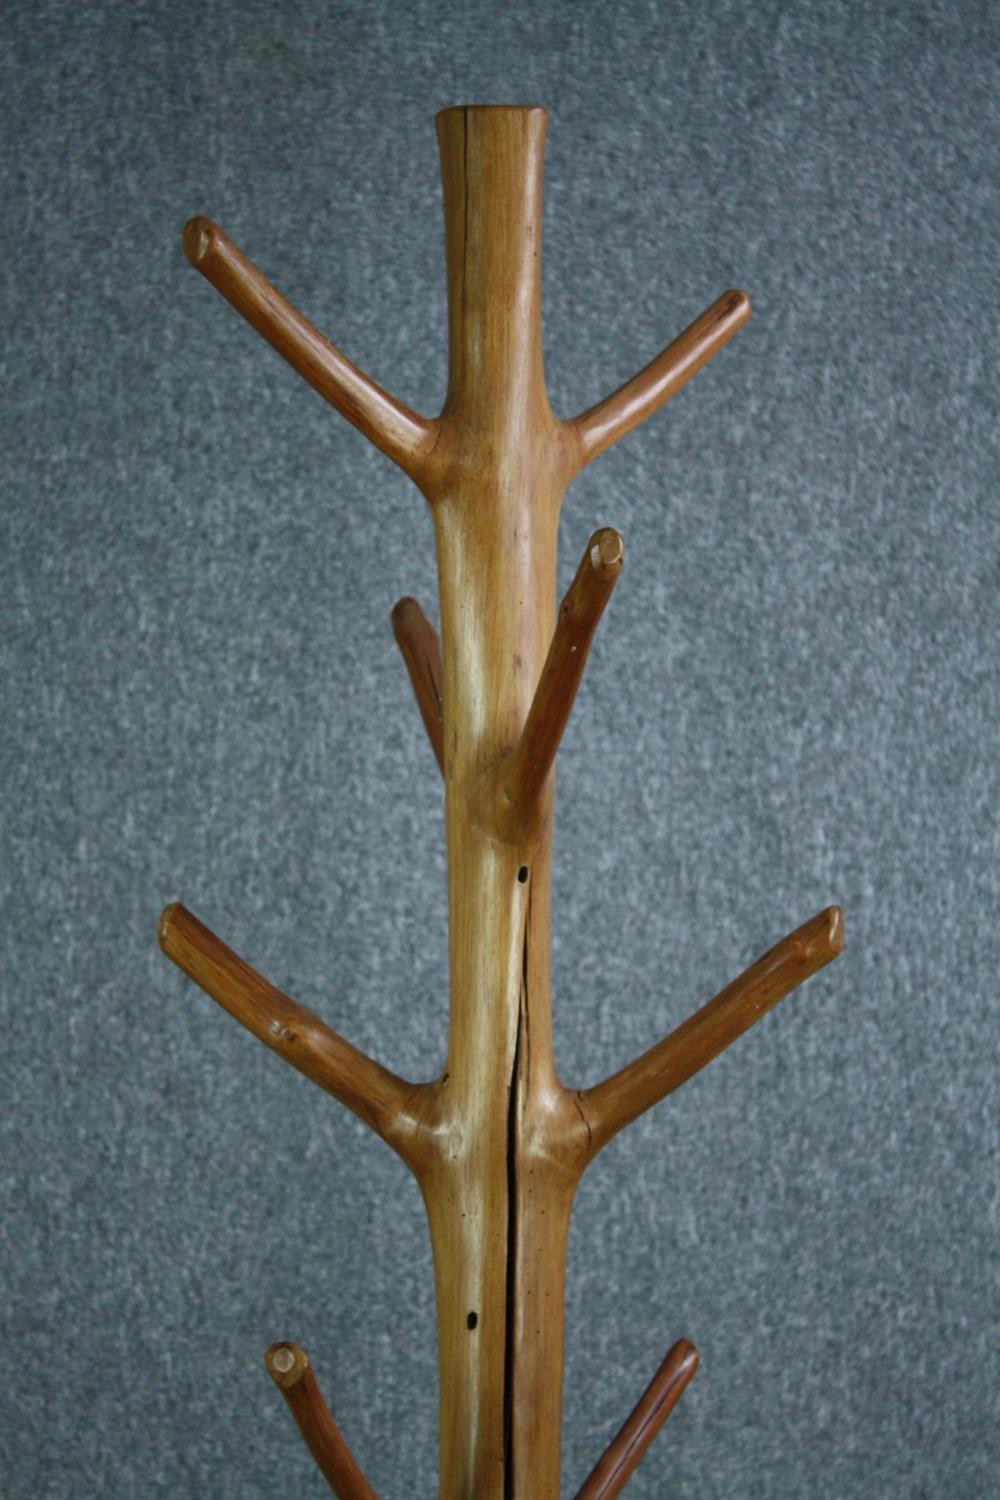 A hall coat and hatstand cut from a hardwood branch. Lacquered finish. H.202cm. - Image 2 of 4